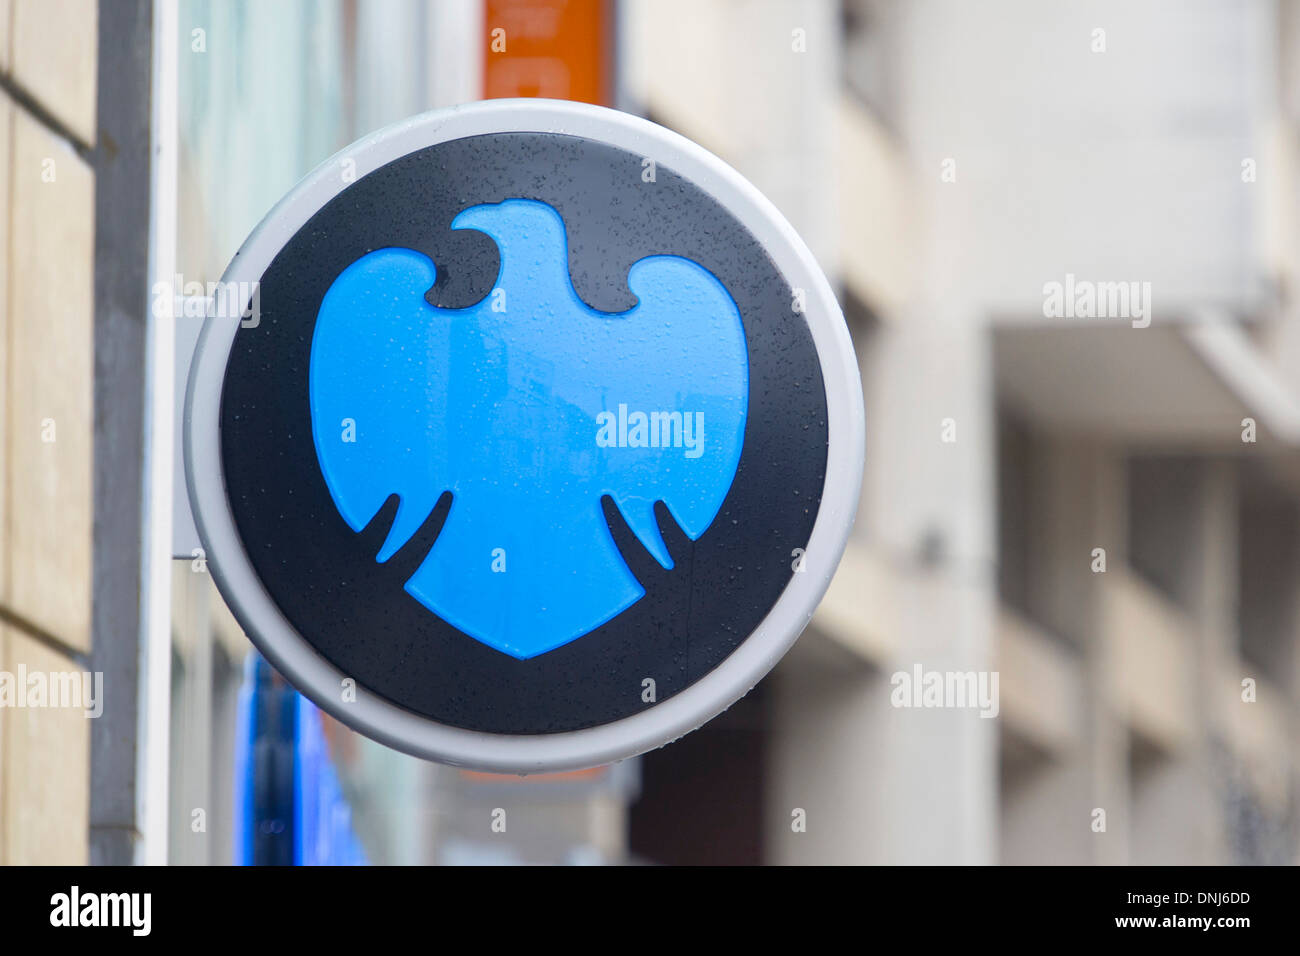 A Barclays bank sign. Stock Photo